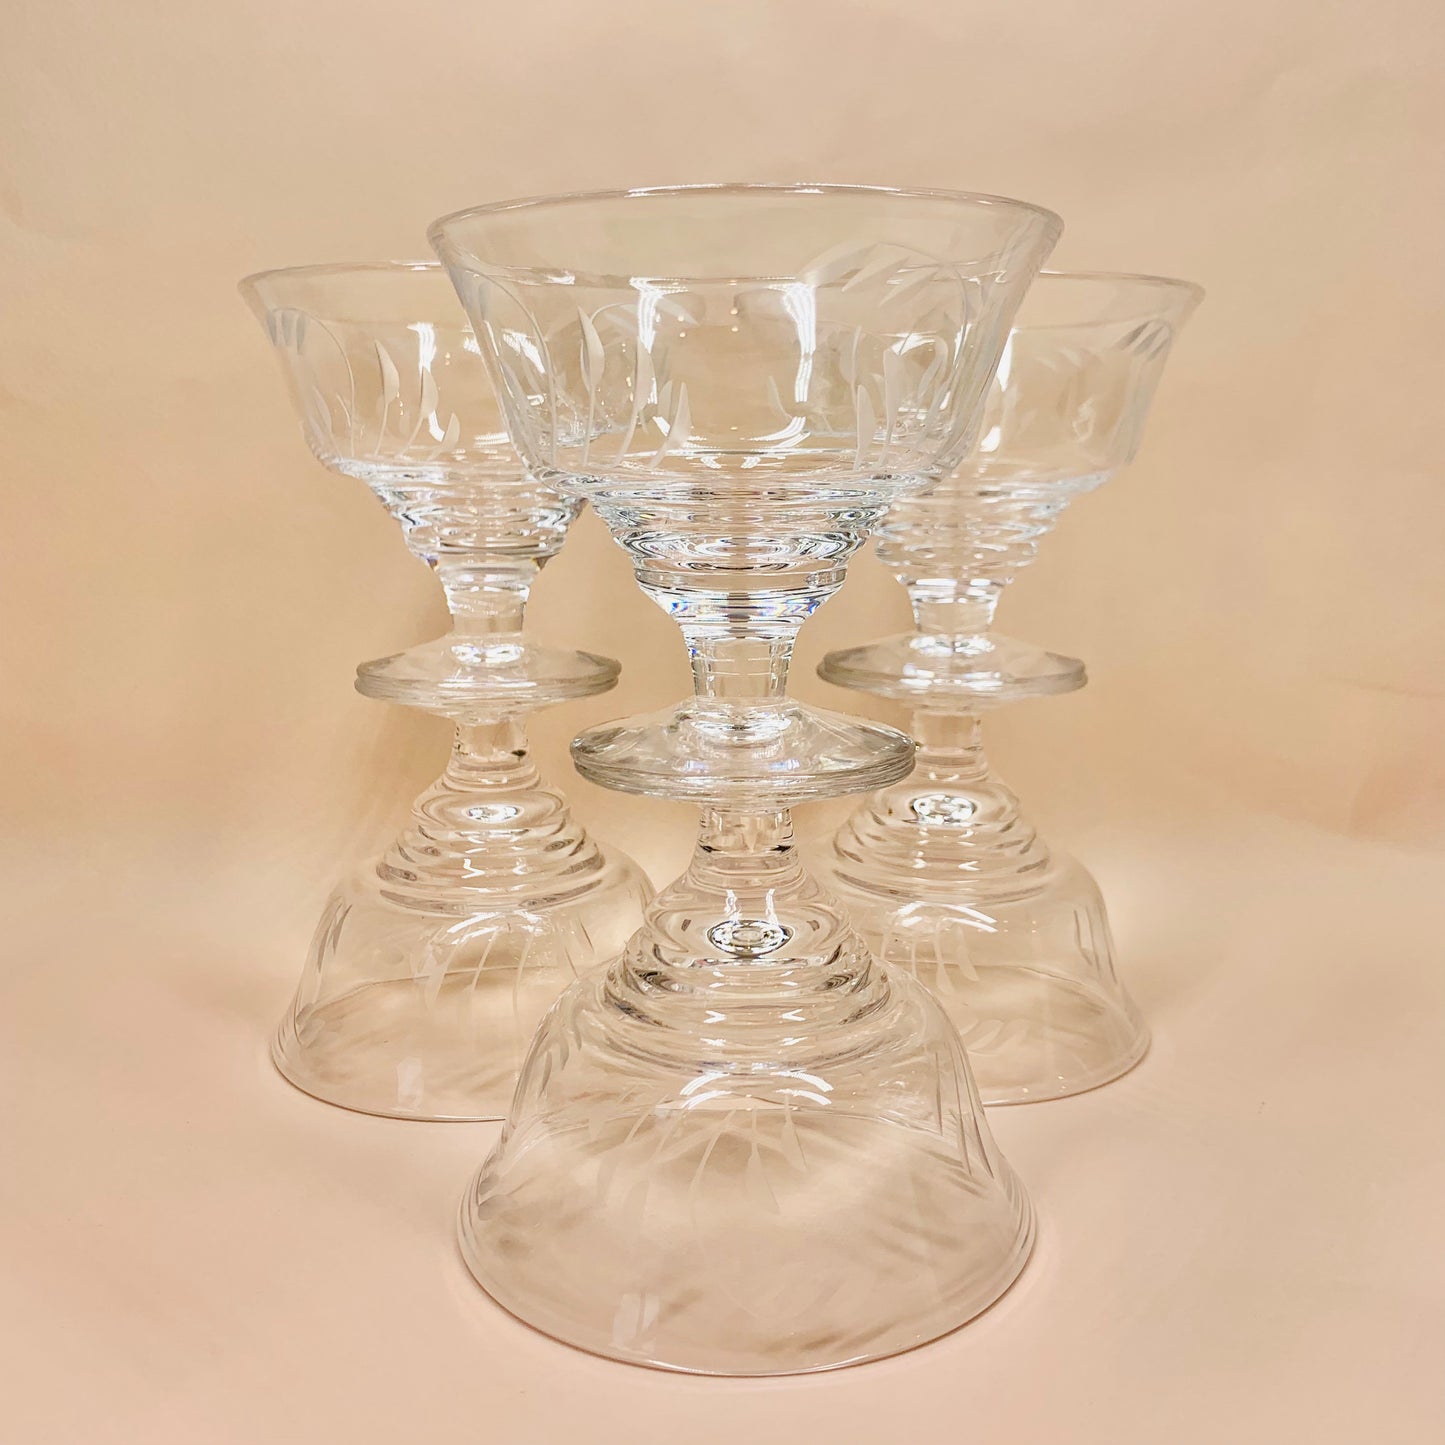 Vintage Stuart cut crystal champagne coupe with etched floral pattern